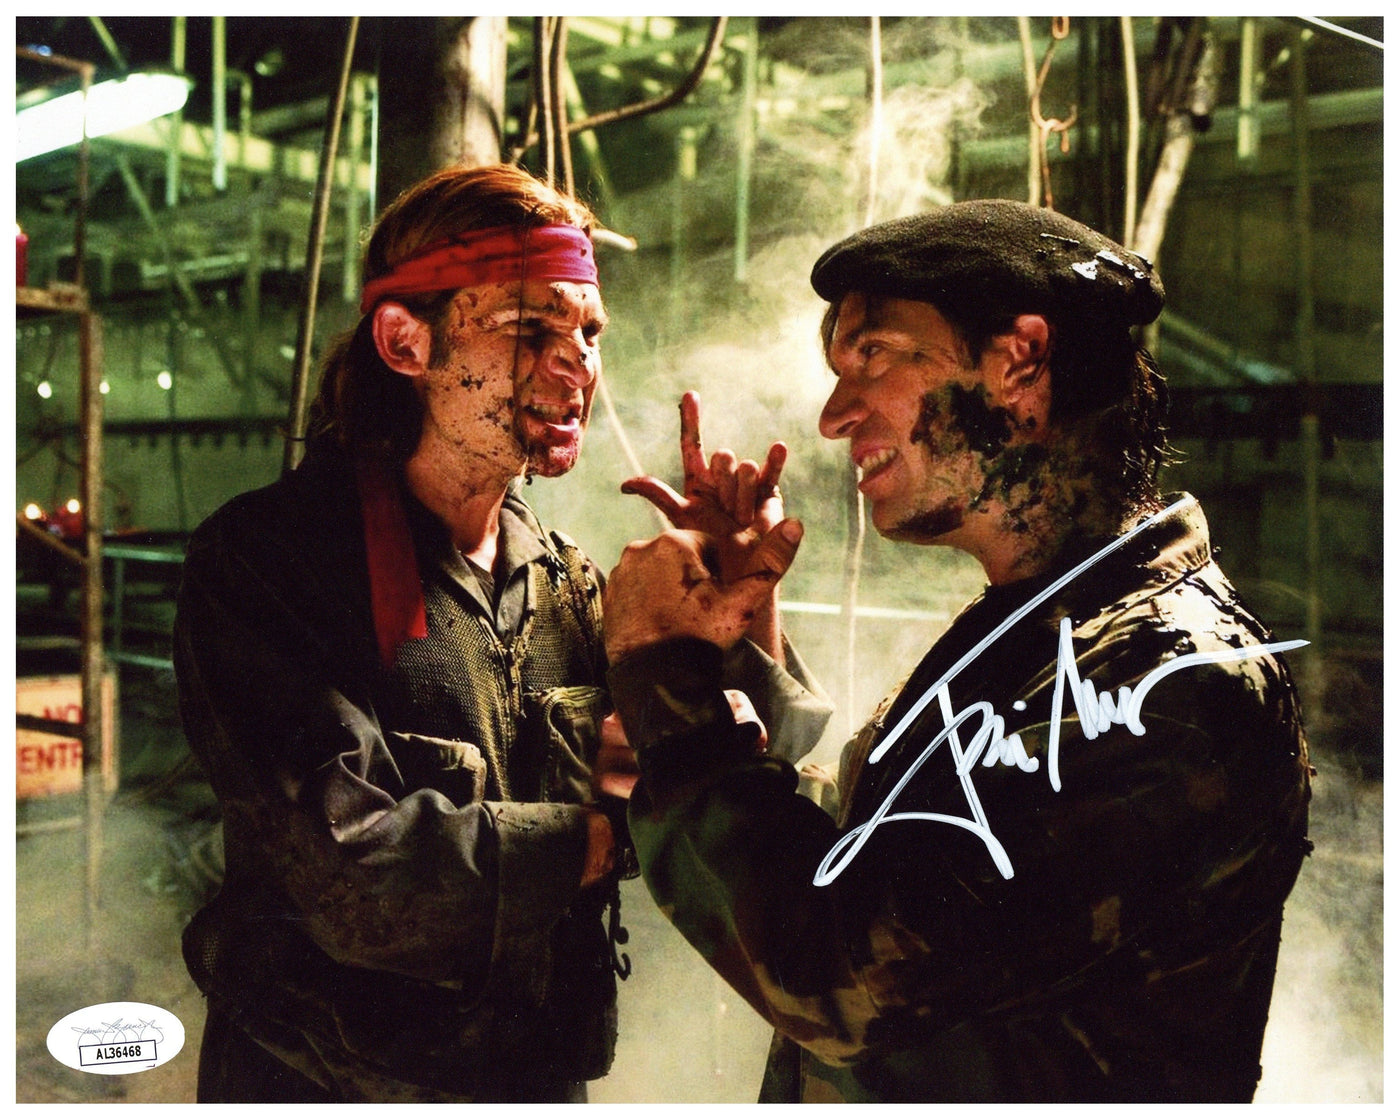 Jamison Newlander Signed 8x10 Photo The Lost Boys Frog Brothers Autographed JSA